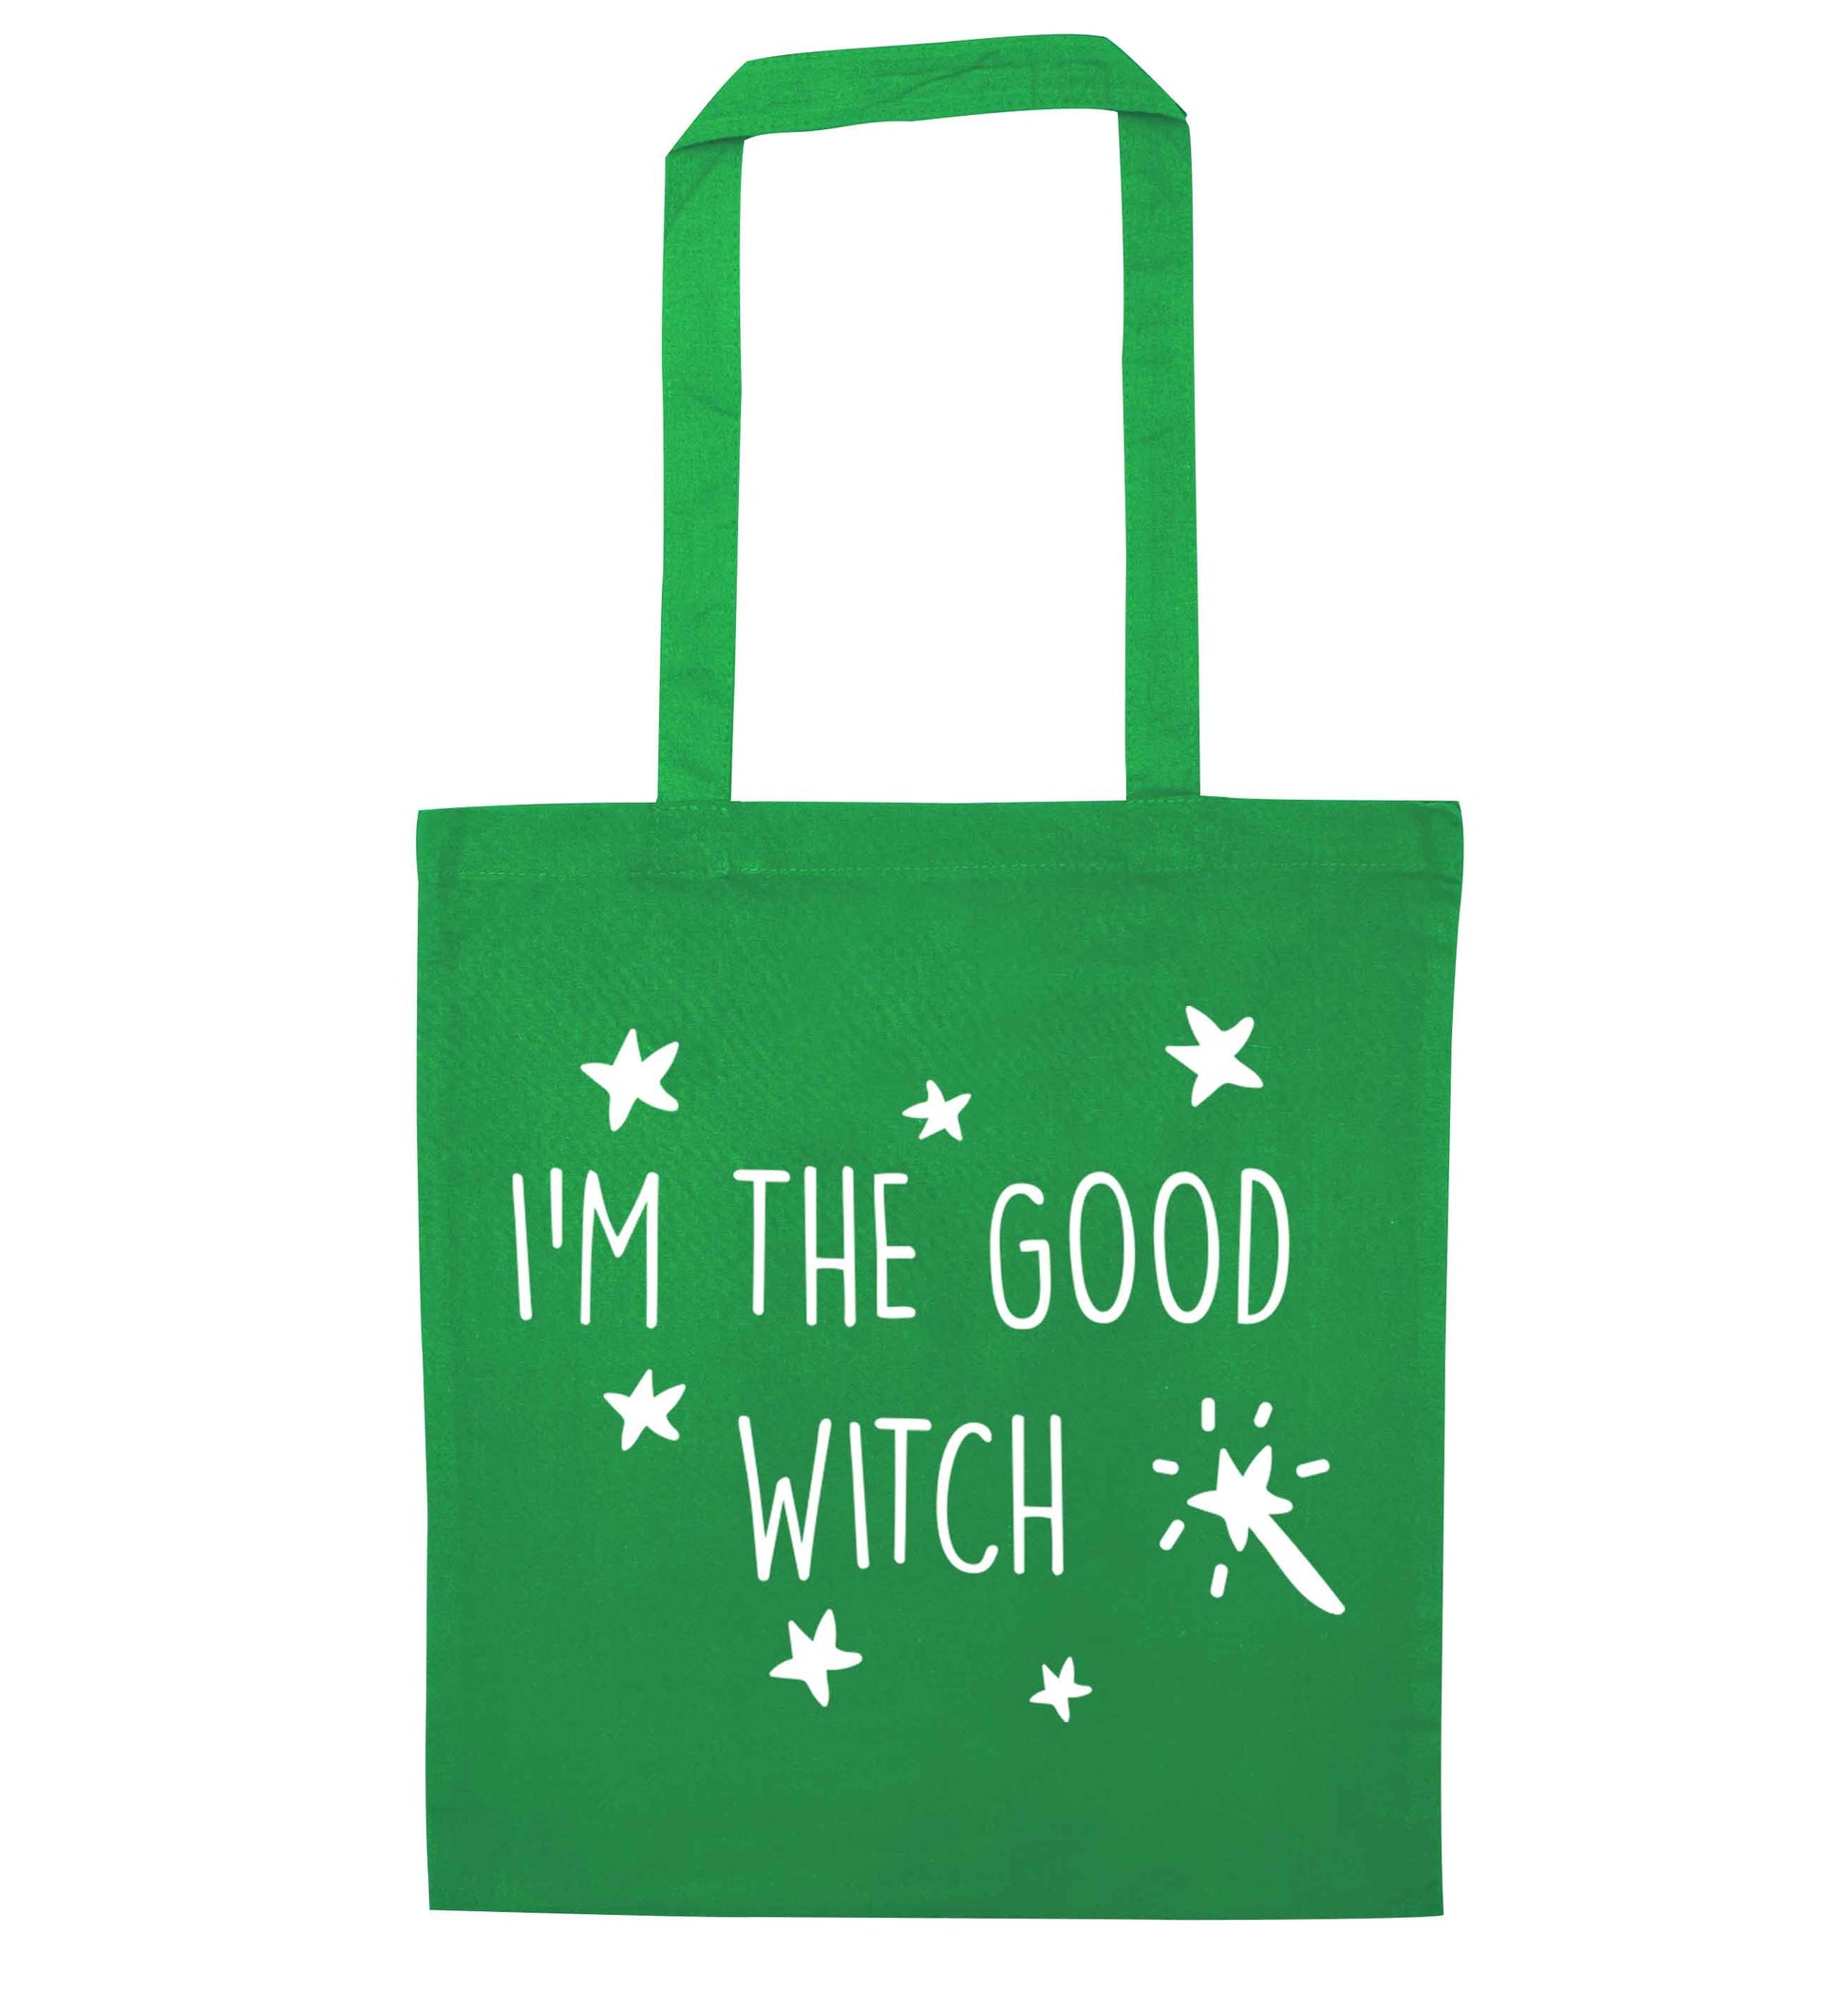 Good witch green tote bag